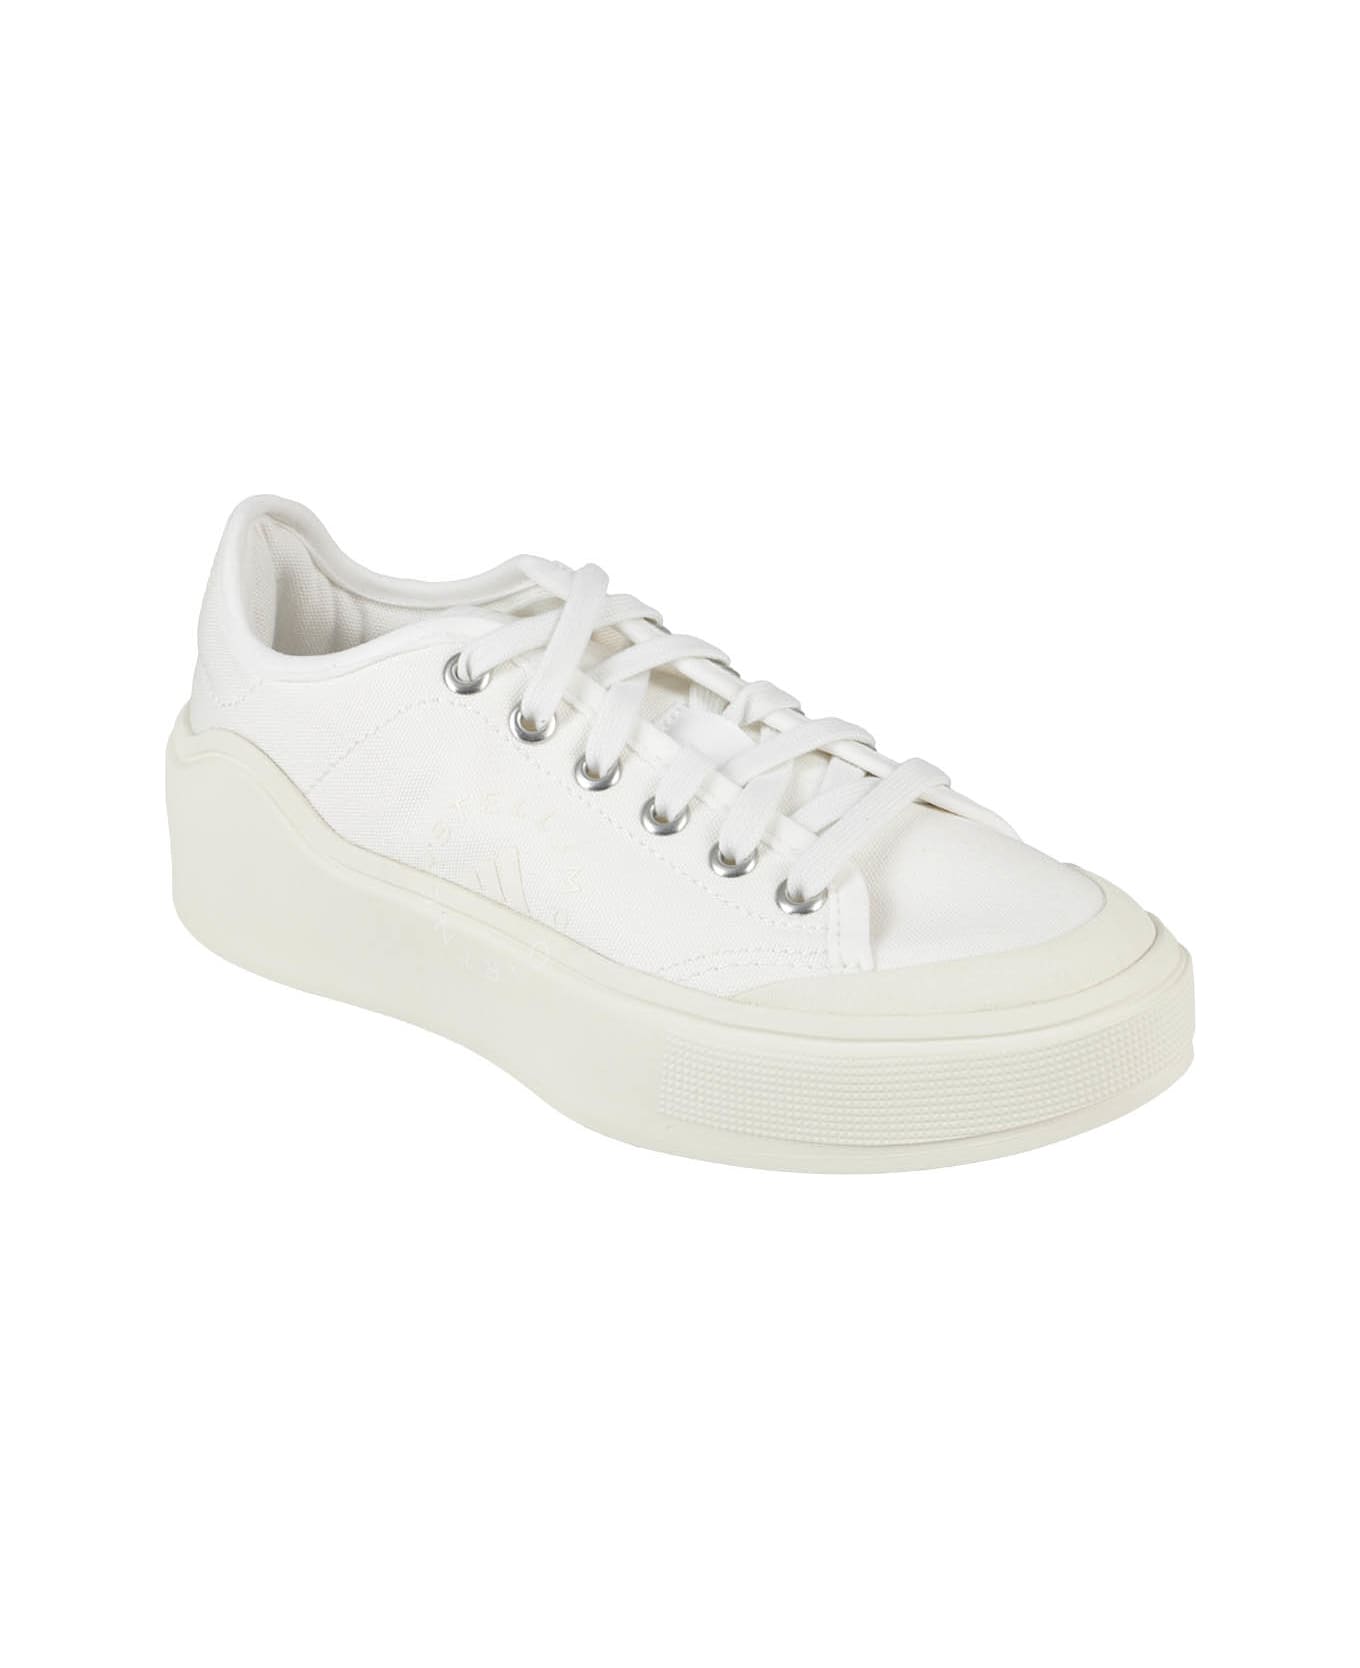 Adidas by Stella McCartney Court Cotton Sneakers Hq8675 - Bianco